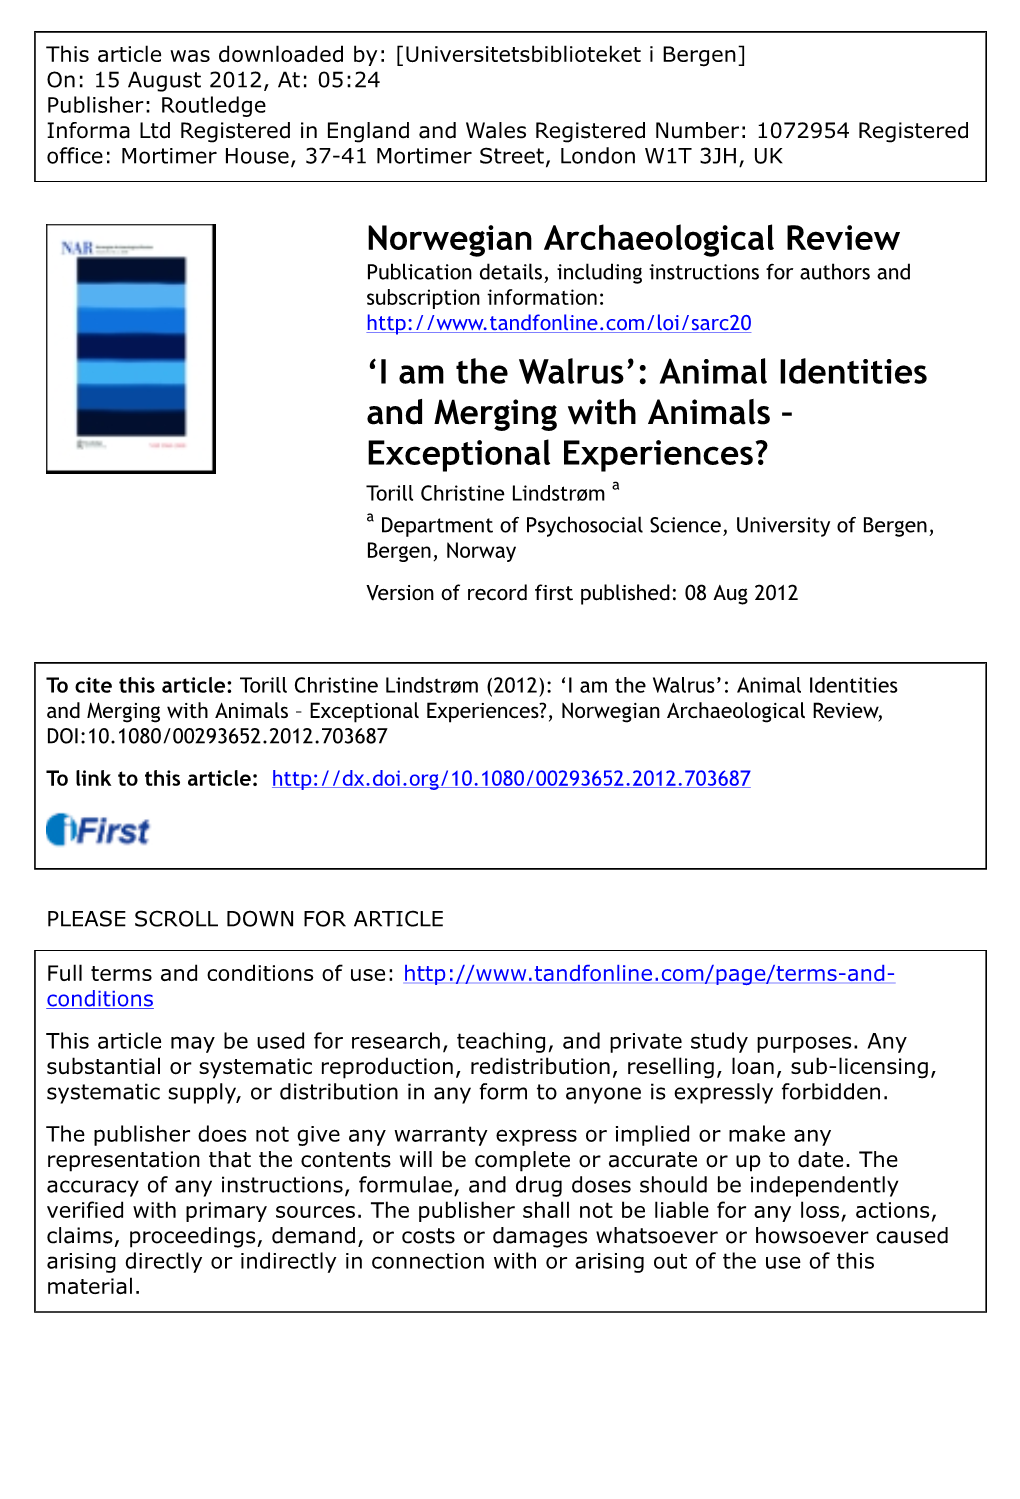 Animal Identities and Merging with Animals